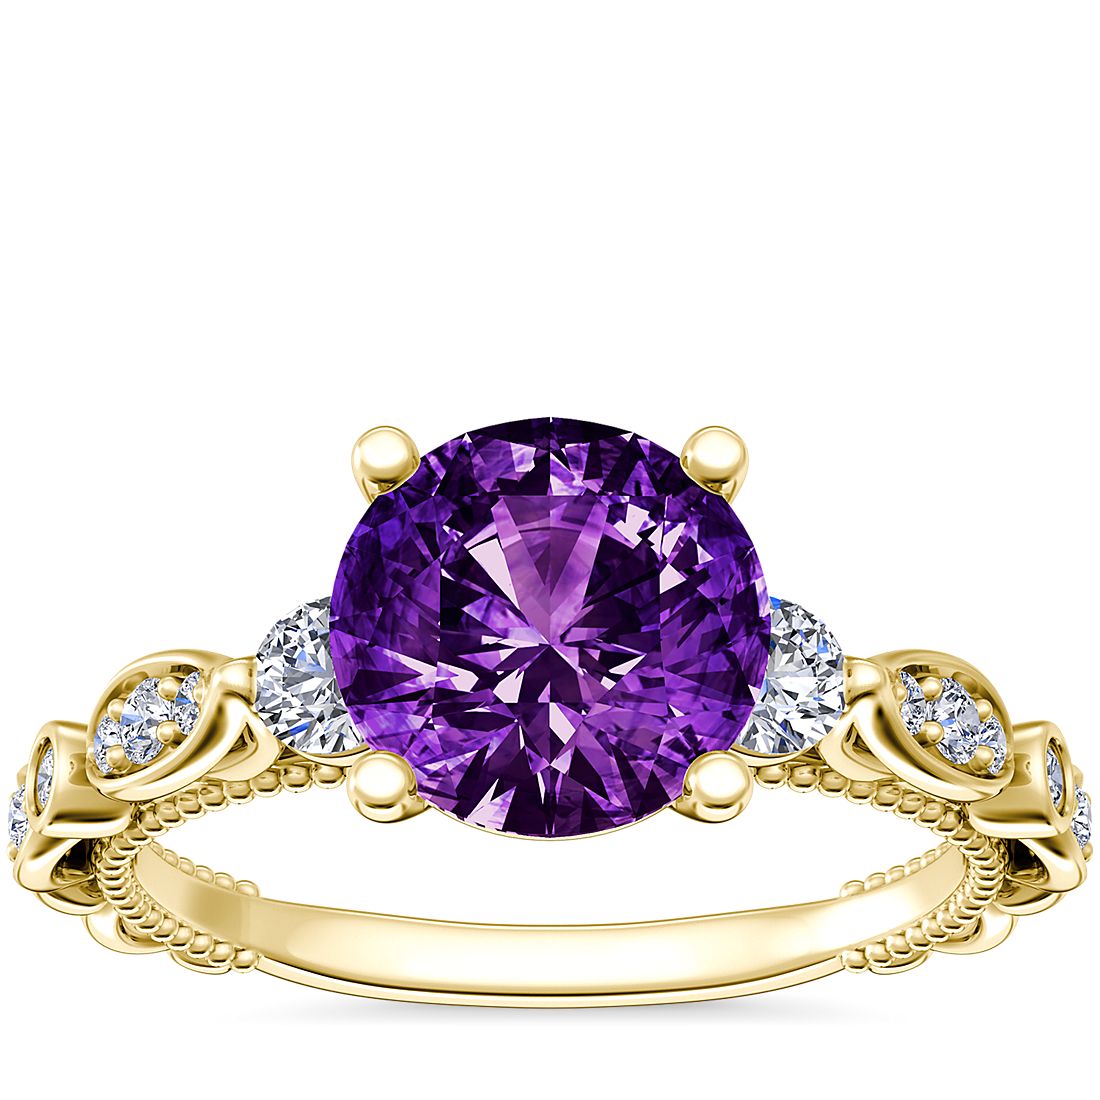 Floral Ellipse Diamond Cathedral Engagement Ring with Round Amethyst in 14k Yellow Gold (8mm)